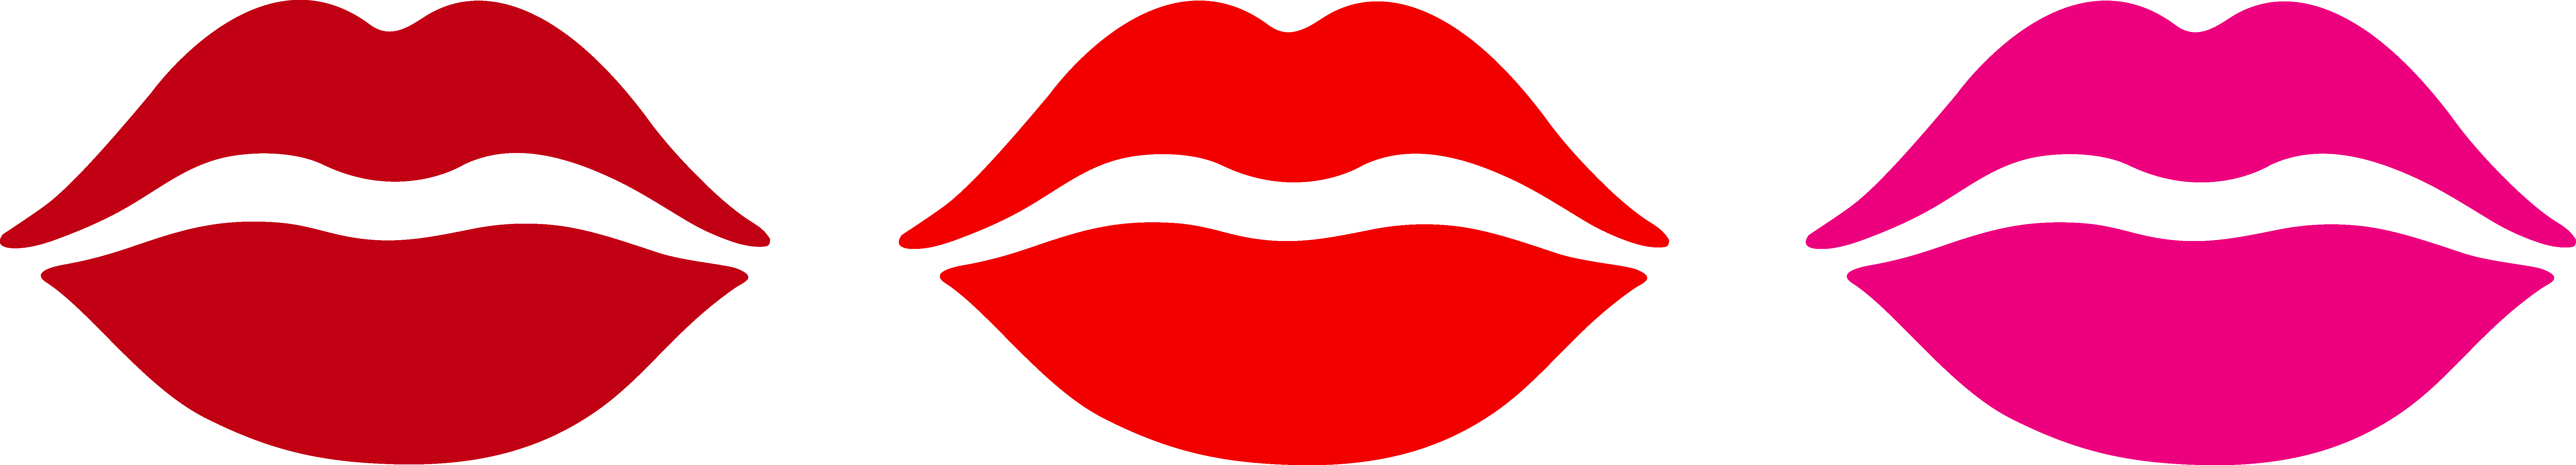 Wallpaper And Desktop For Pc February - Draw A Kiss Mark (8778x1586)